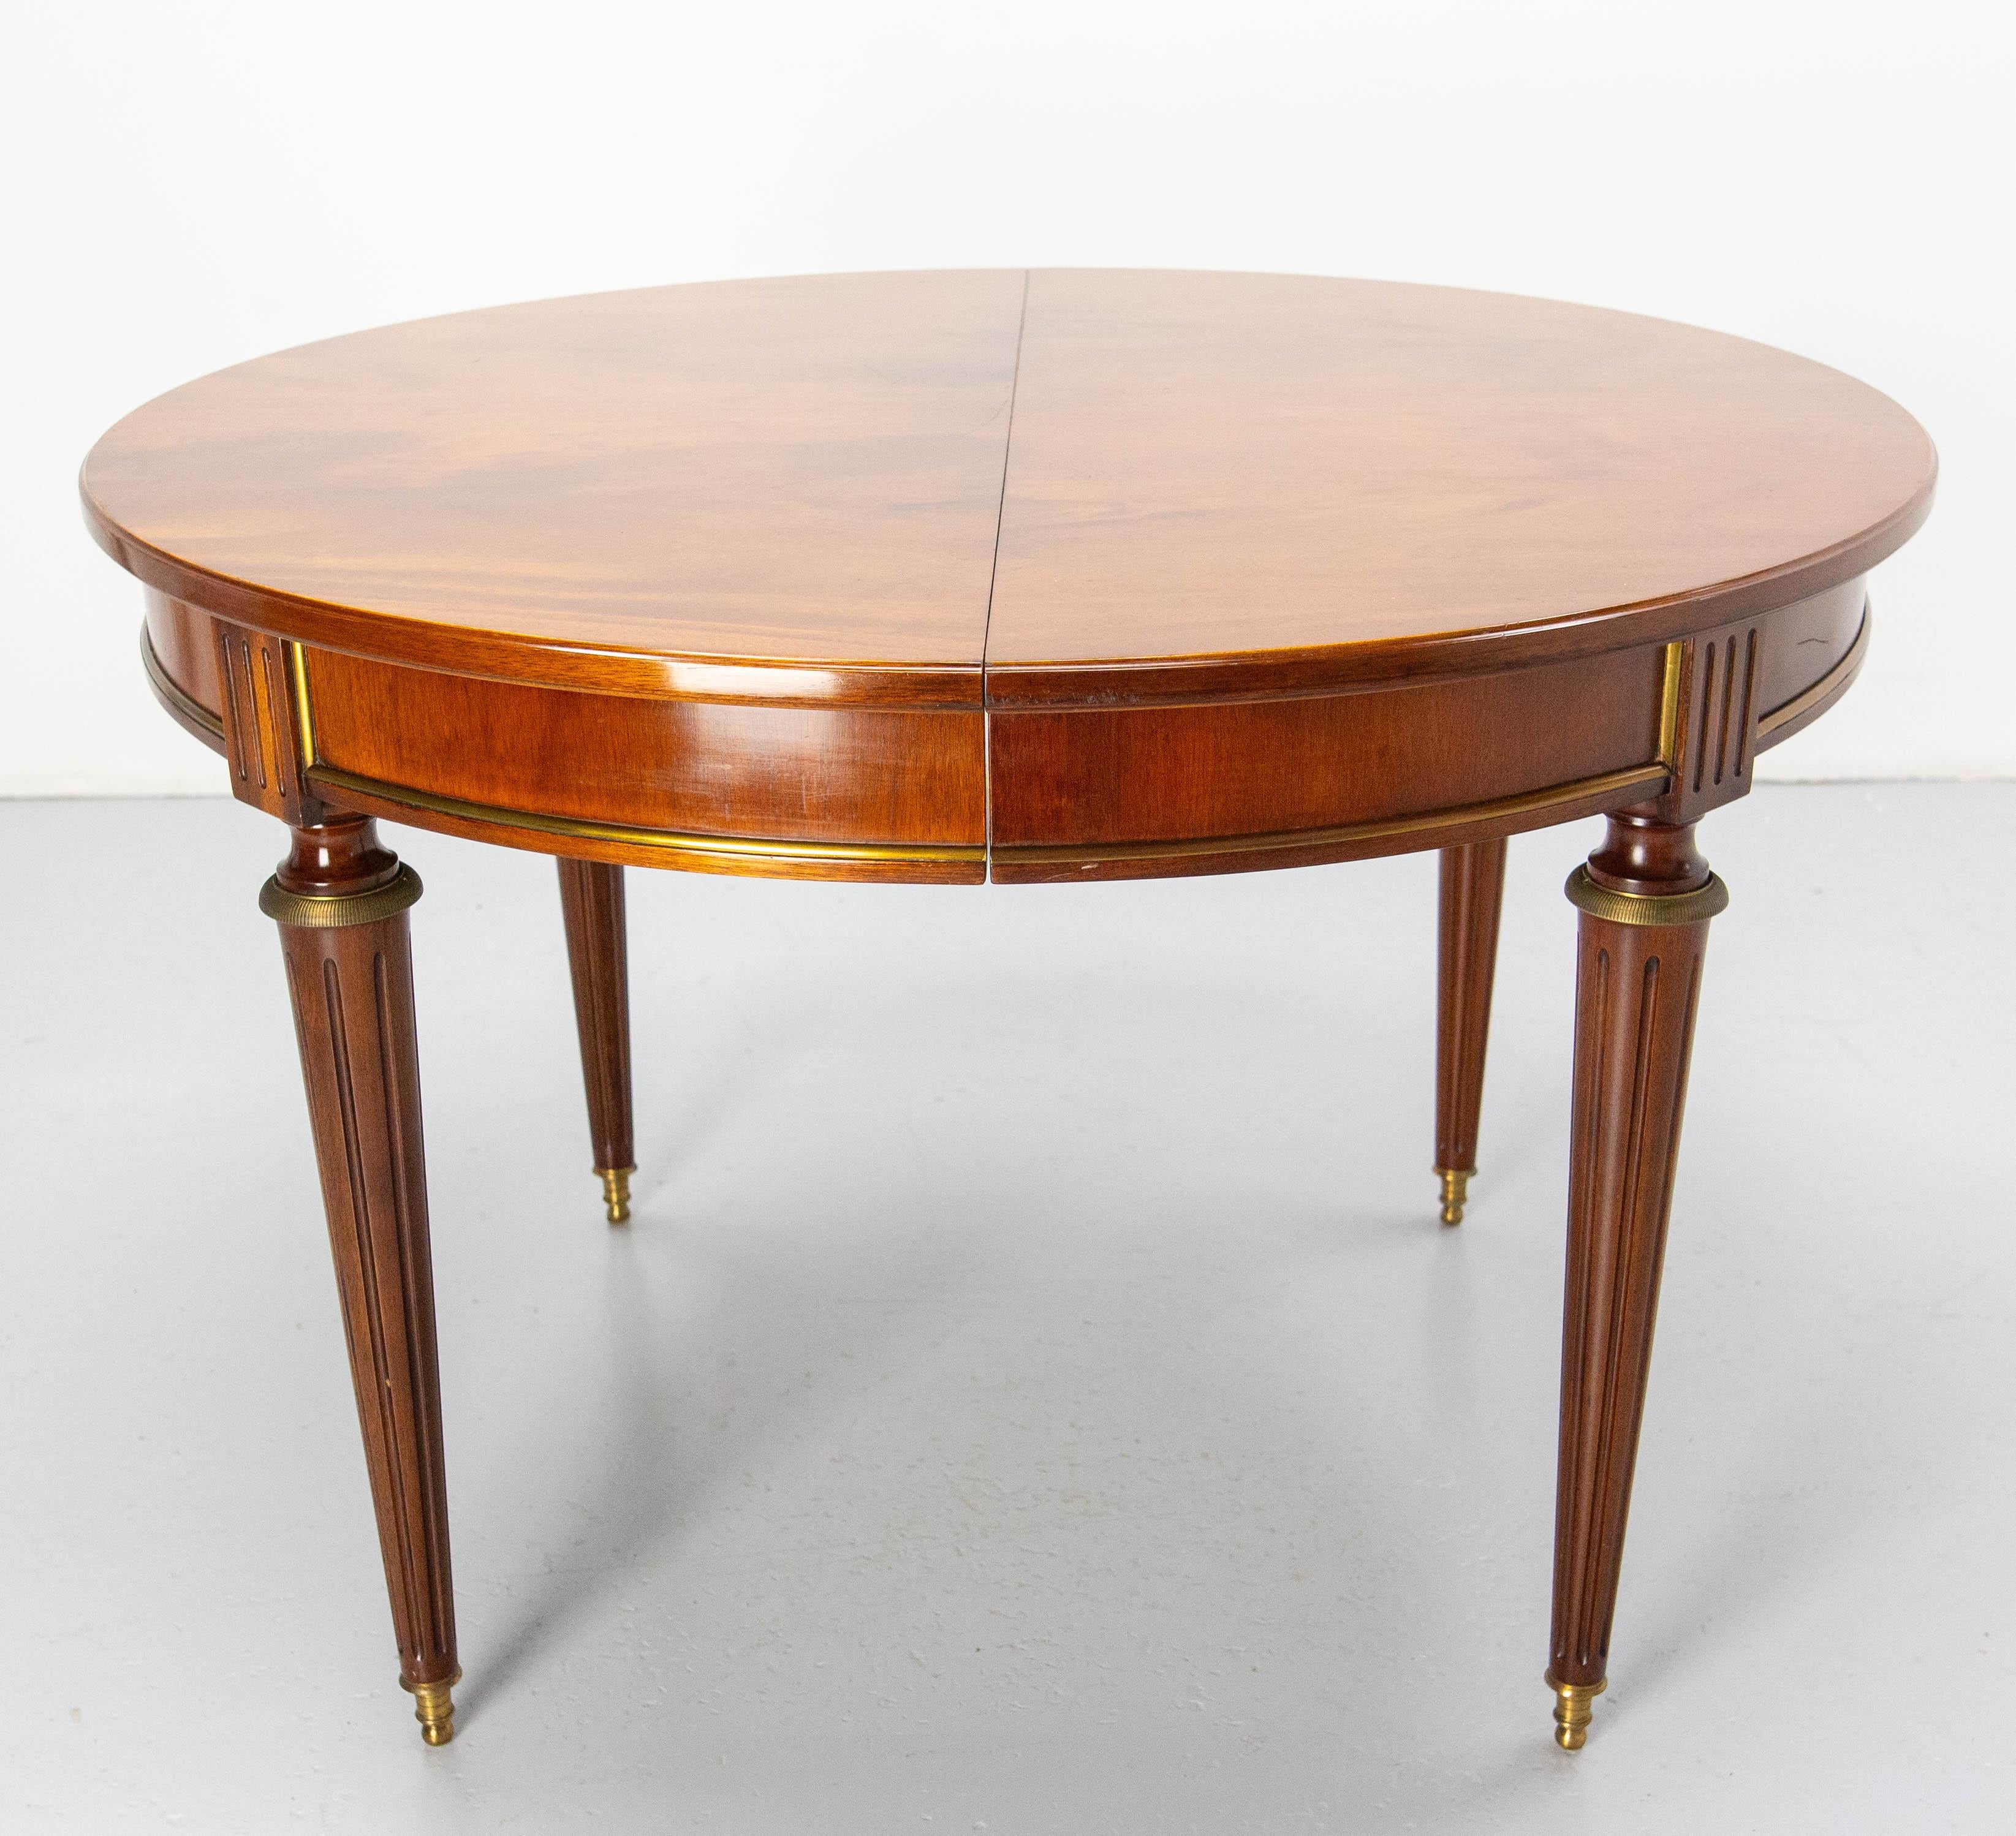 French extending dining table, mid-century in the Louis XVI style.
Iroko wood.

Dimension without the extension: diameter: 43.31 in. (110 cm)
Good condition with very few marks of use on the table (see photo of the top). 

Shipping:
110 / 110 / H 75